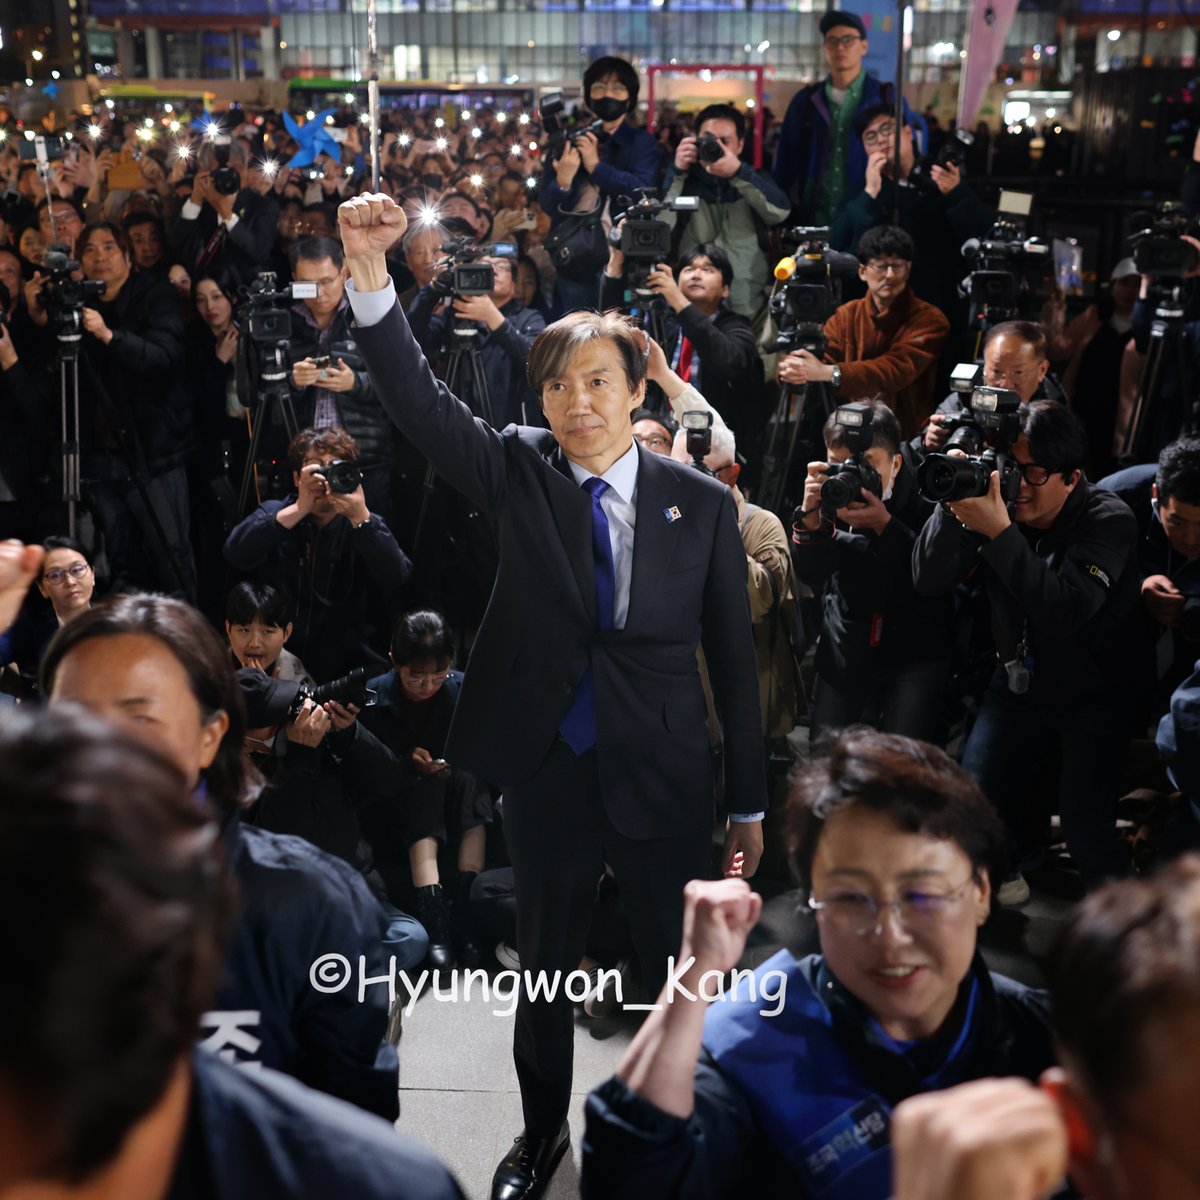 Cho Kuk, the head of the Rebuilding Korea Party shows resolve at the final rally on the eve of the April 10 National Assembly election in Seoul, Korea. Photo © Hyungwon Kang #조국 #조국혁신당 #chokuk #총선 #Korea #NationalAssembly #election2024 #seoul